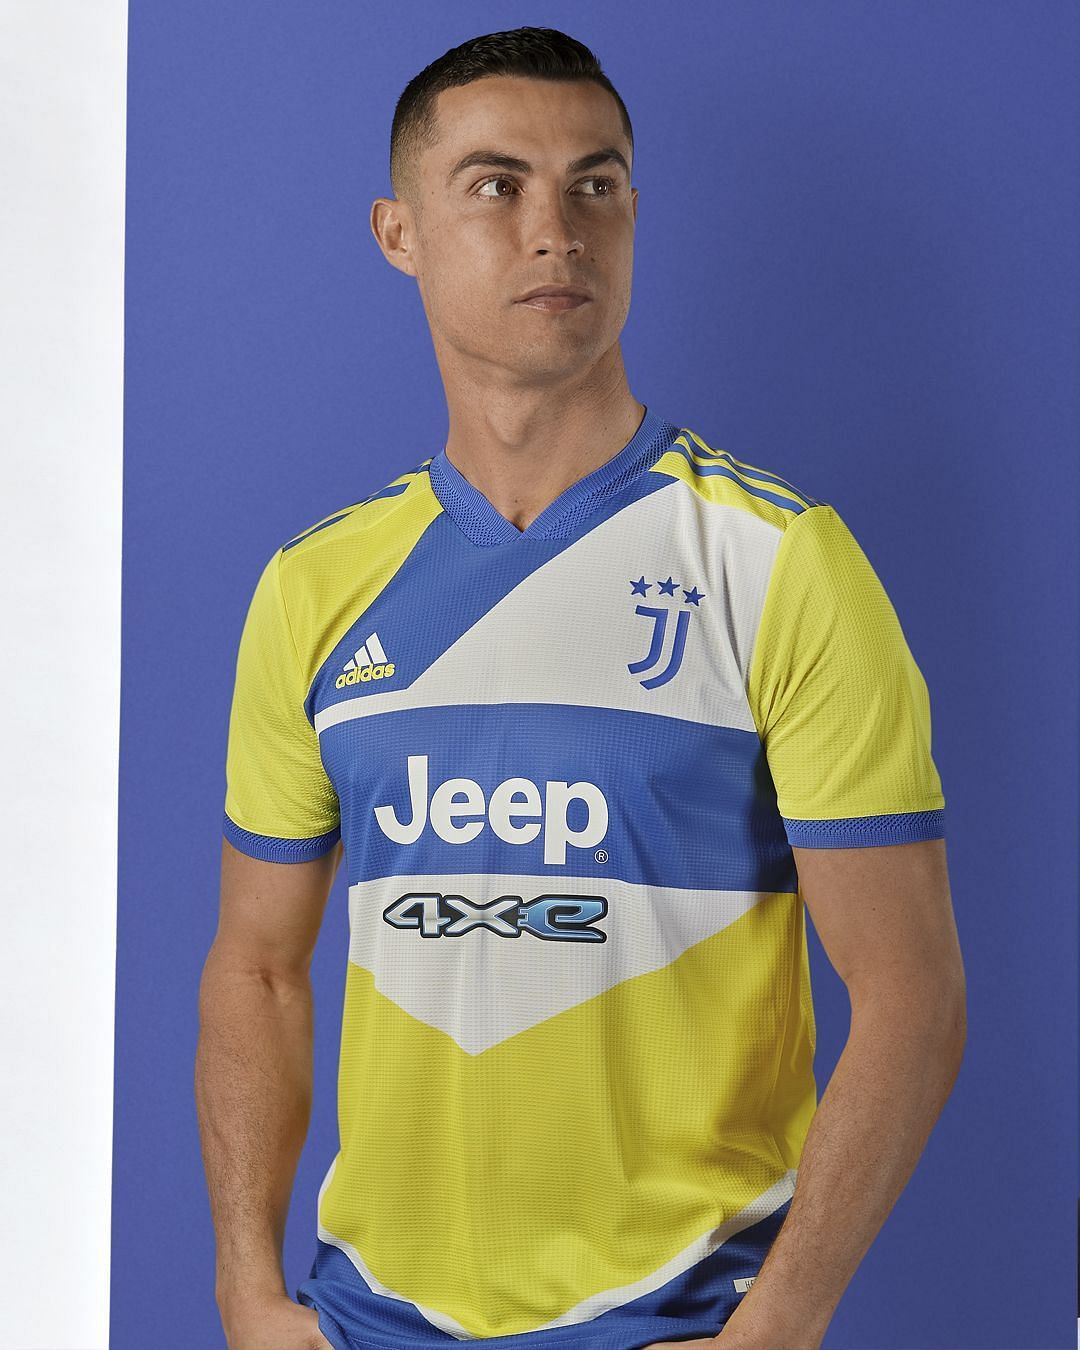 This is the worst football shirt of the 2021/22 season, with a rating